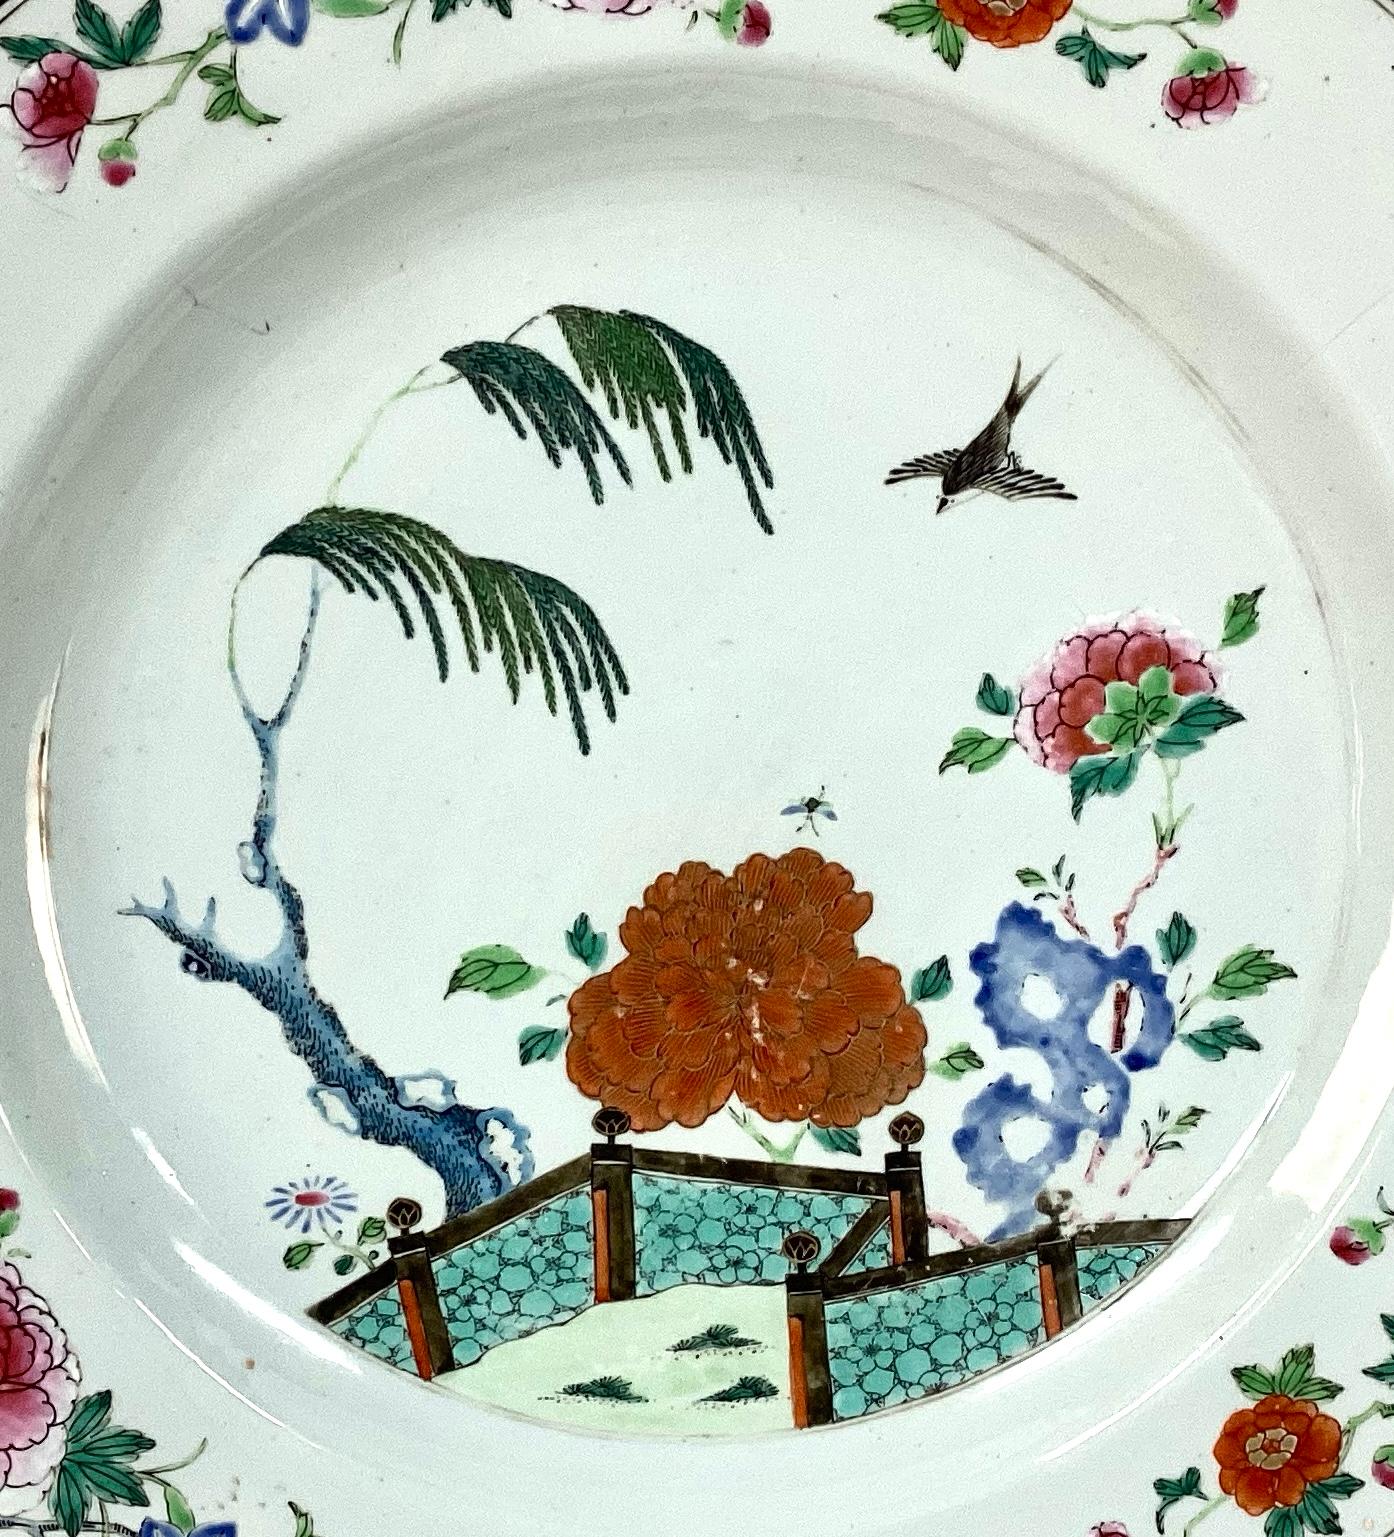 Large Chinese Export Qing Famille Rose Porcelain Platter. White porcelain with birds, flowers, trees and landscape in beautiful reds, pink, green and blue. Platter is very large and in excellent condition. There has been some written information on